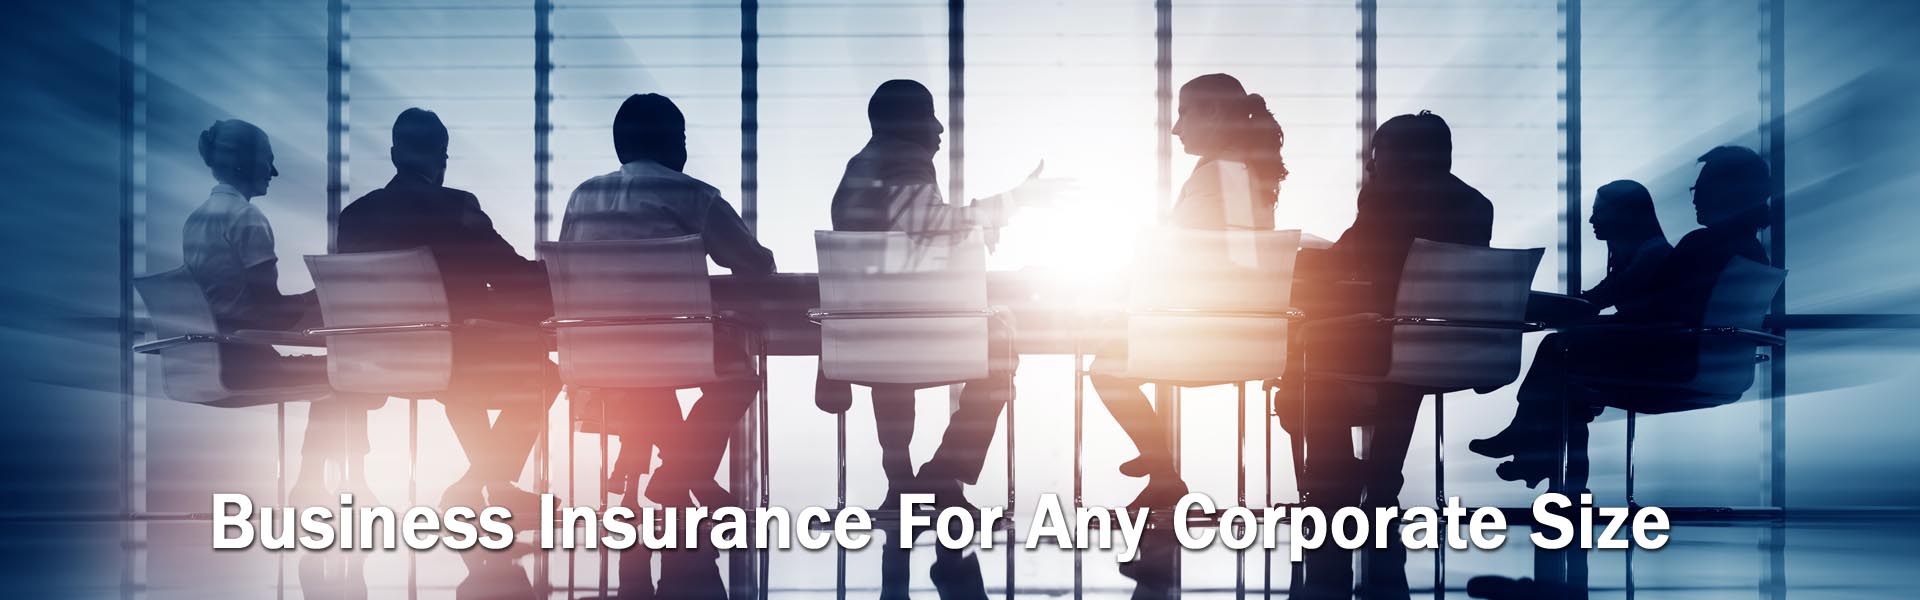 Business Insurance For Any Corporate Size